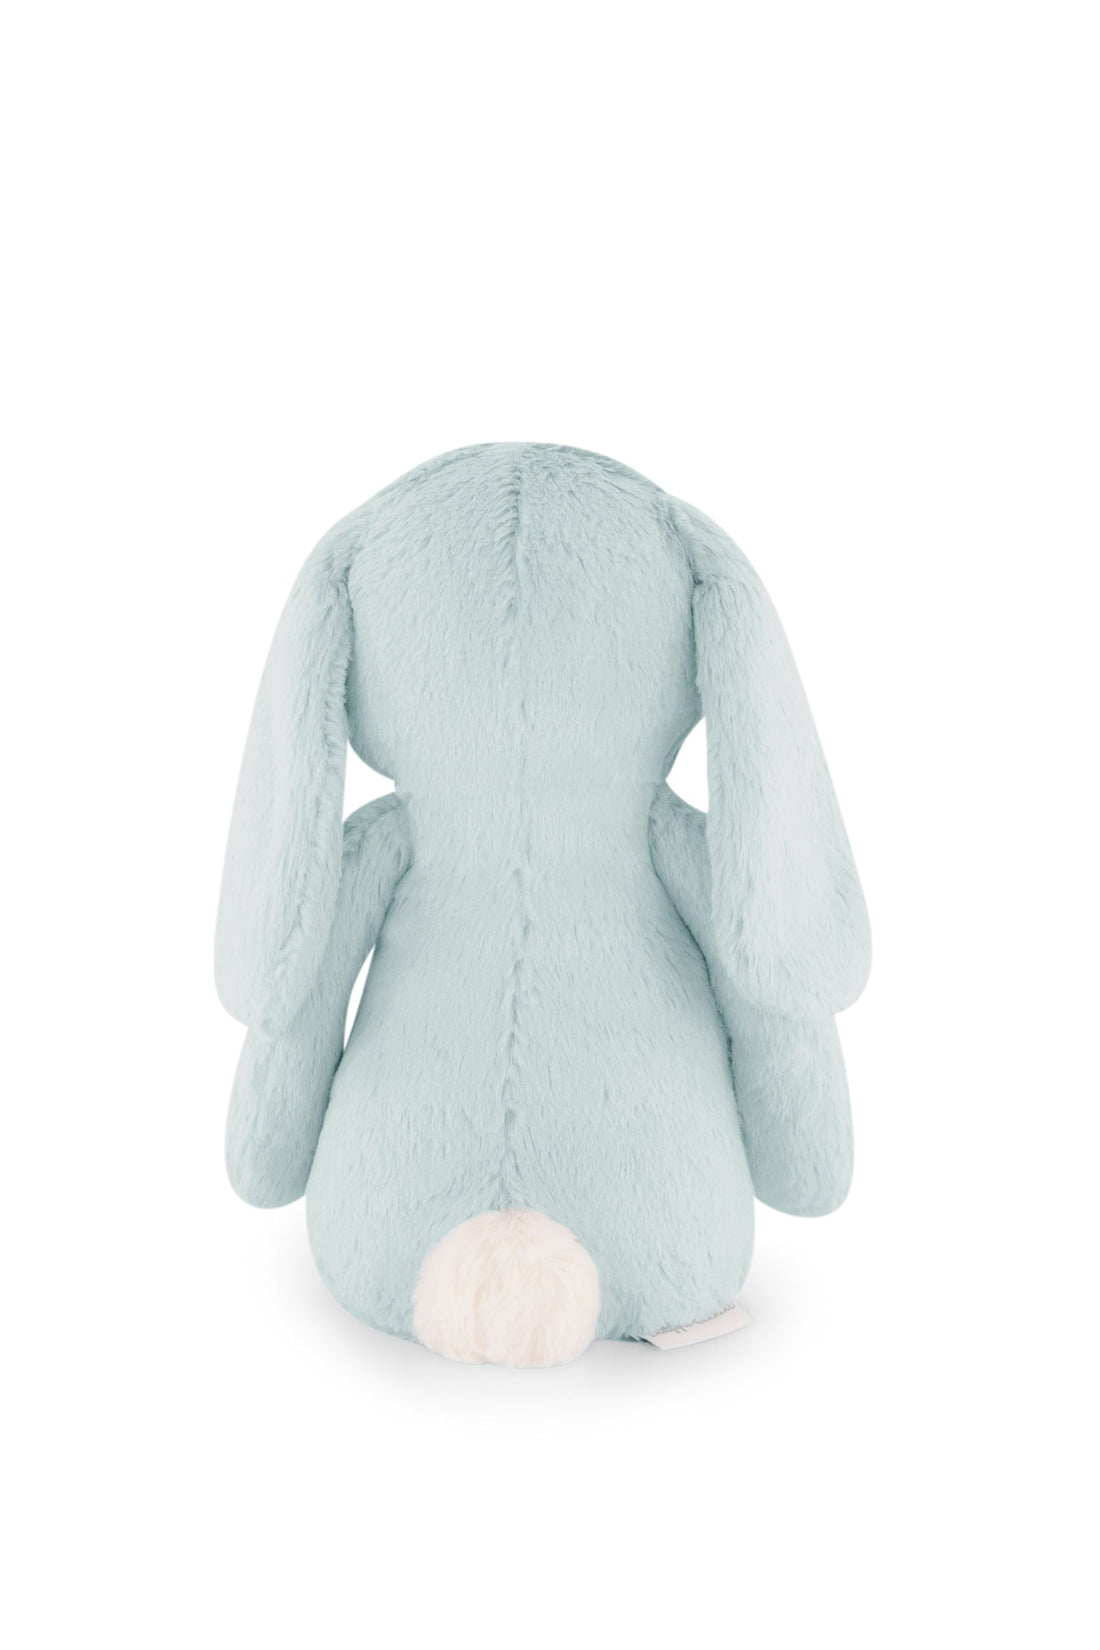 Snuggle Bunnies - Penelope the Bunny - Sprout Childrens Toy from Jamie Kay NZ